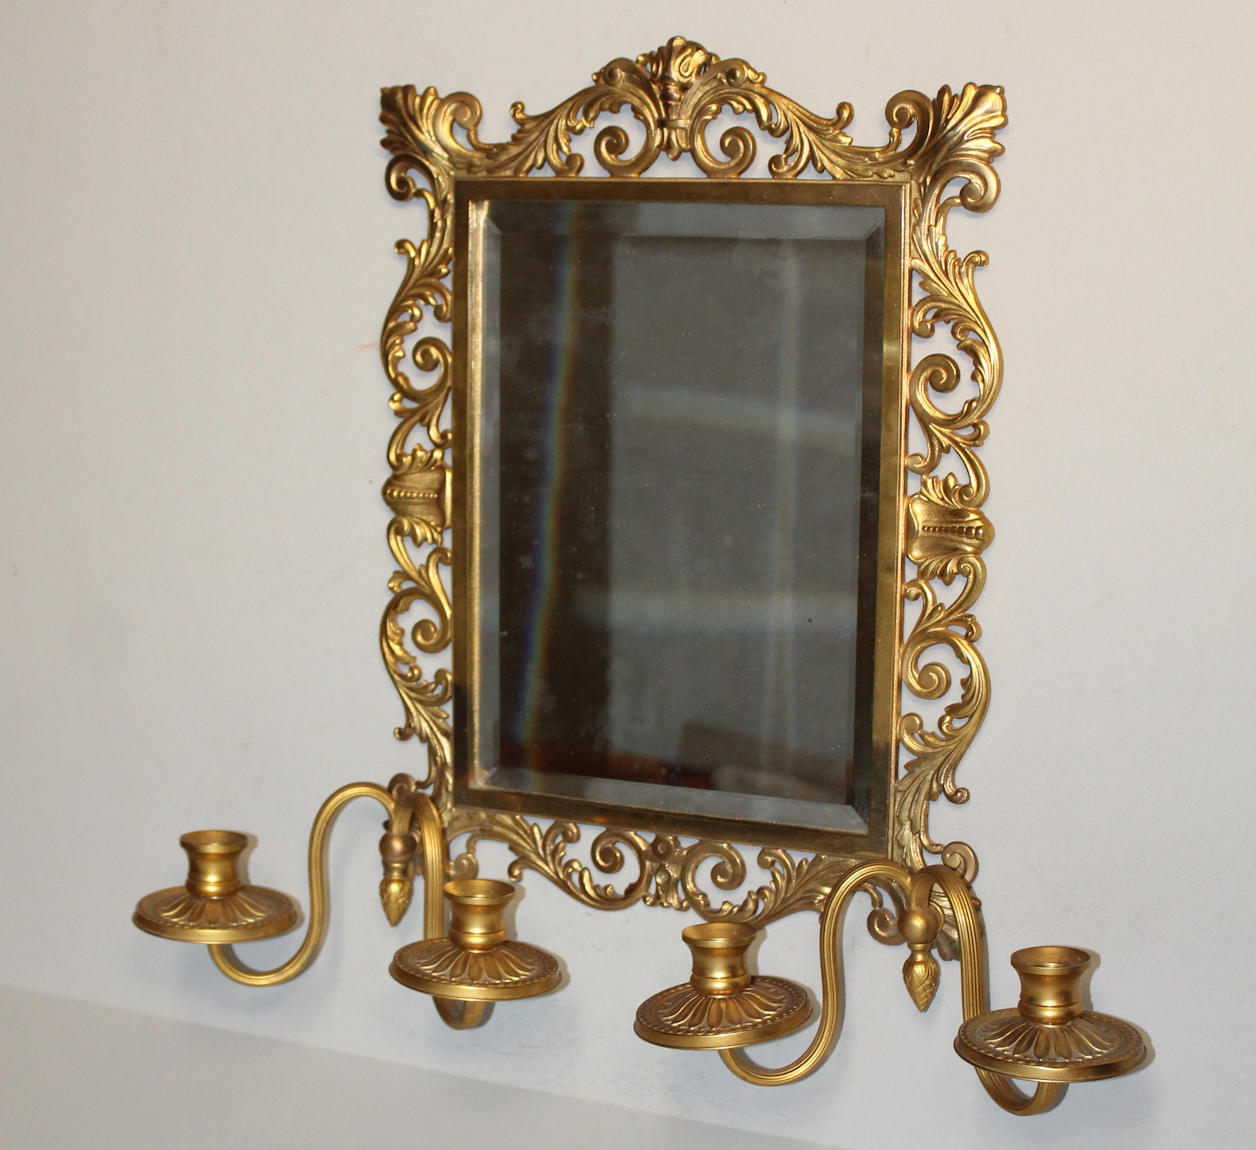 Bargain John's Antiques  Antique Victorian Cast Iron Brass Plated Mirror  with Candle Holders - Bradley and Hubbard - Measures 13 inches x 17 inches  - Bargain John's Antiques